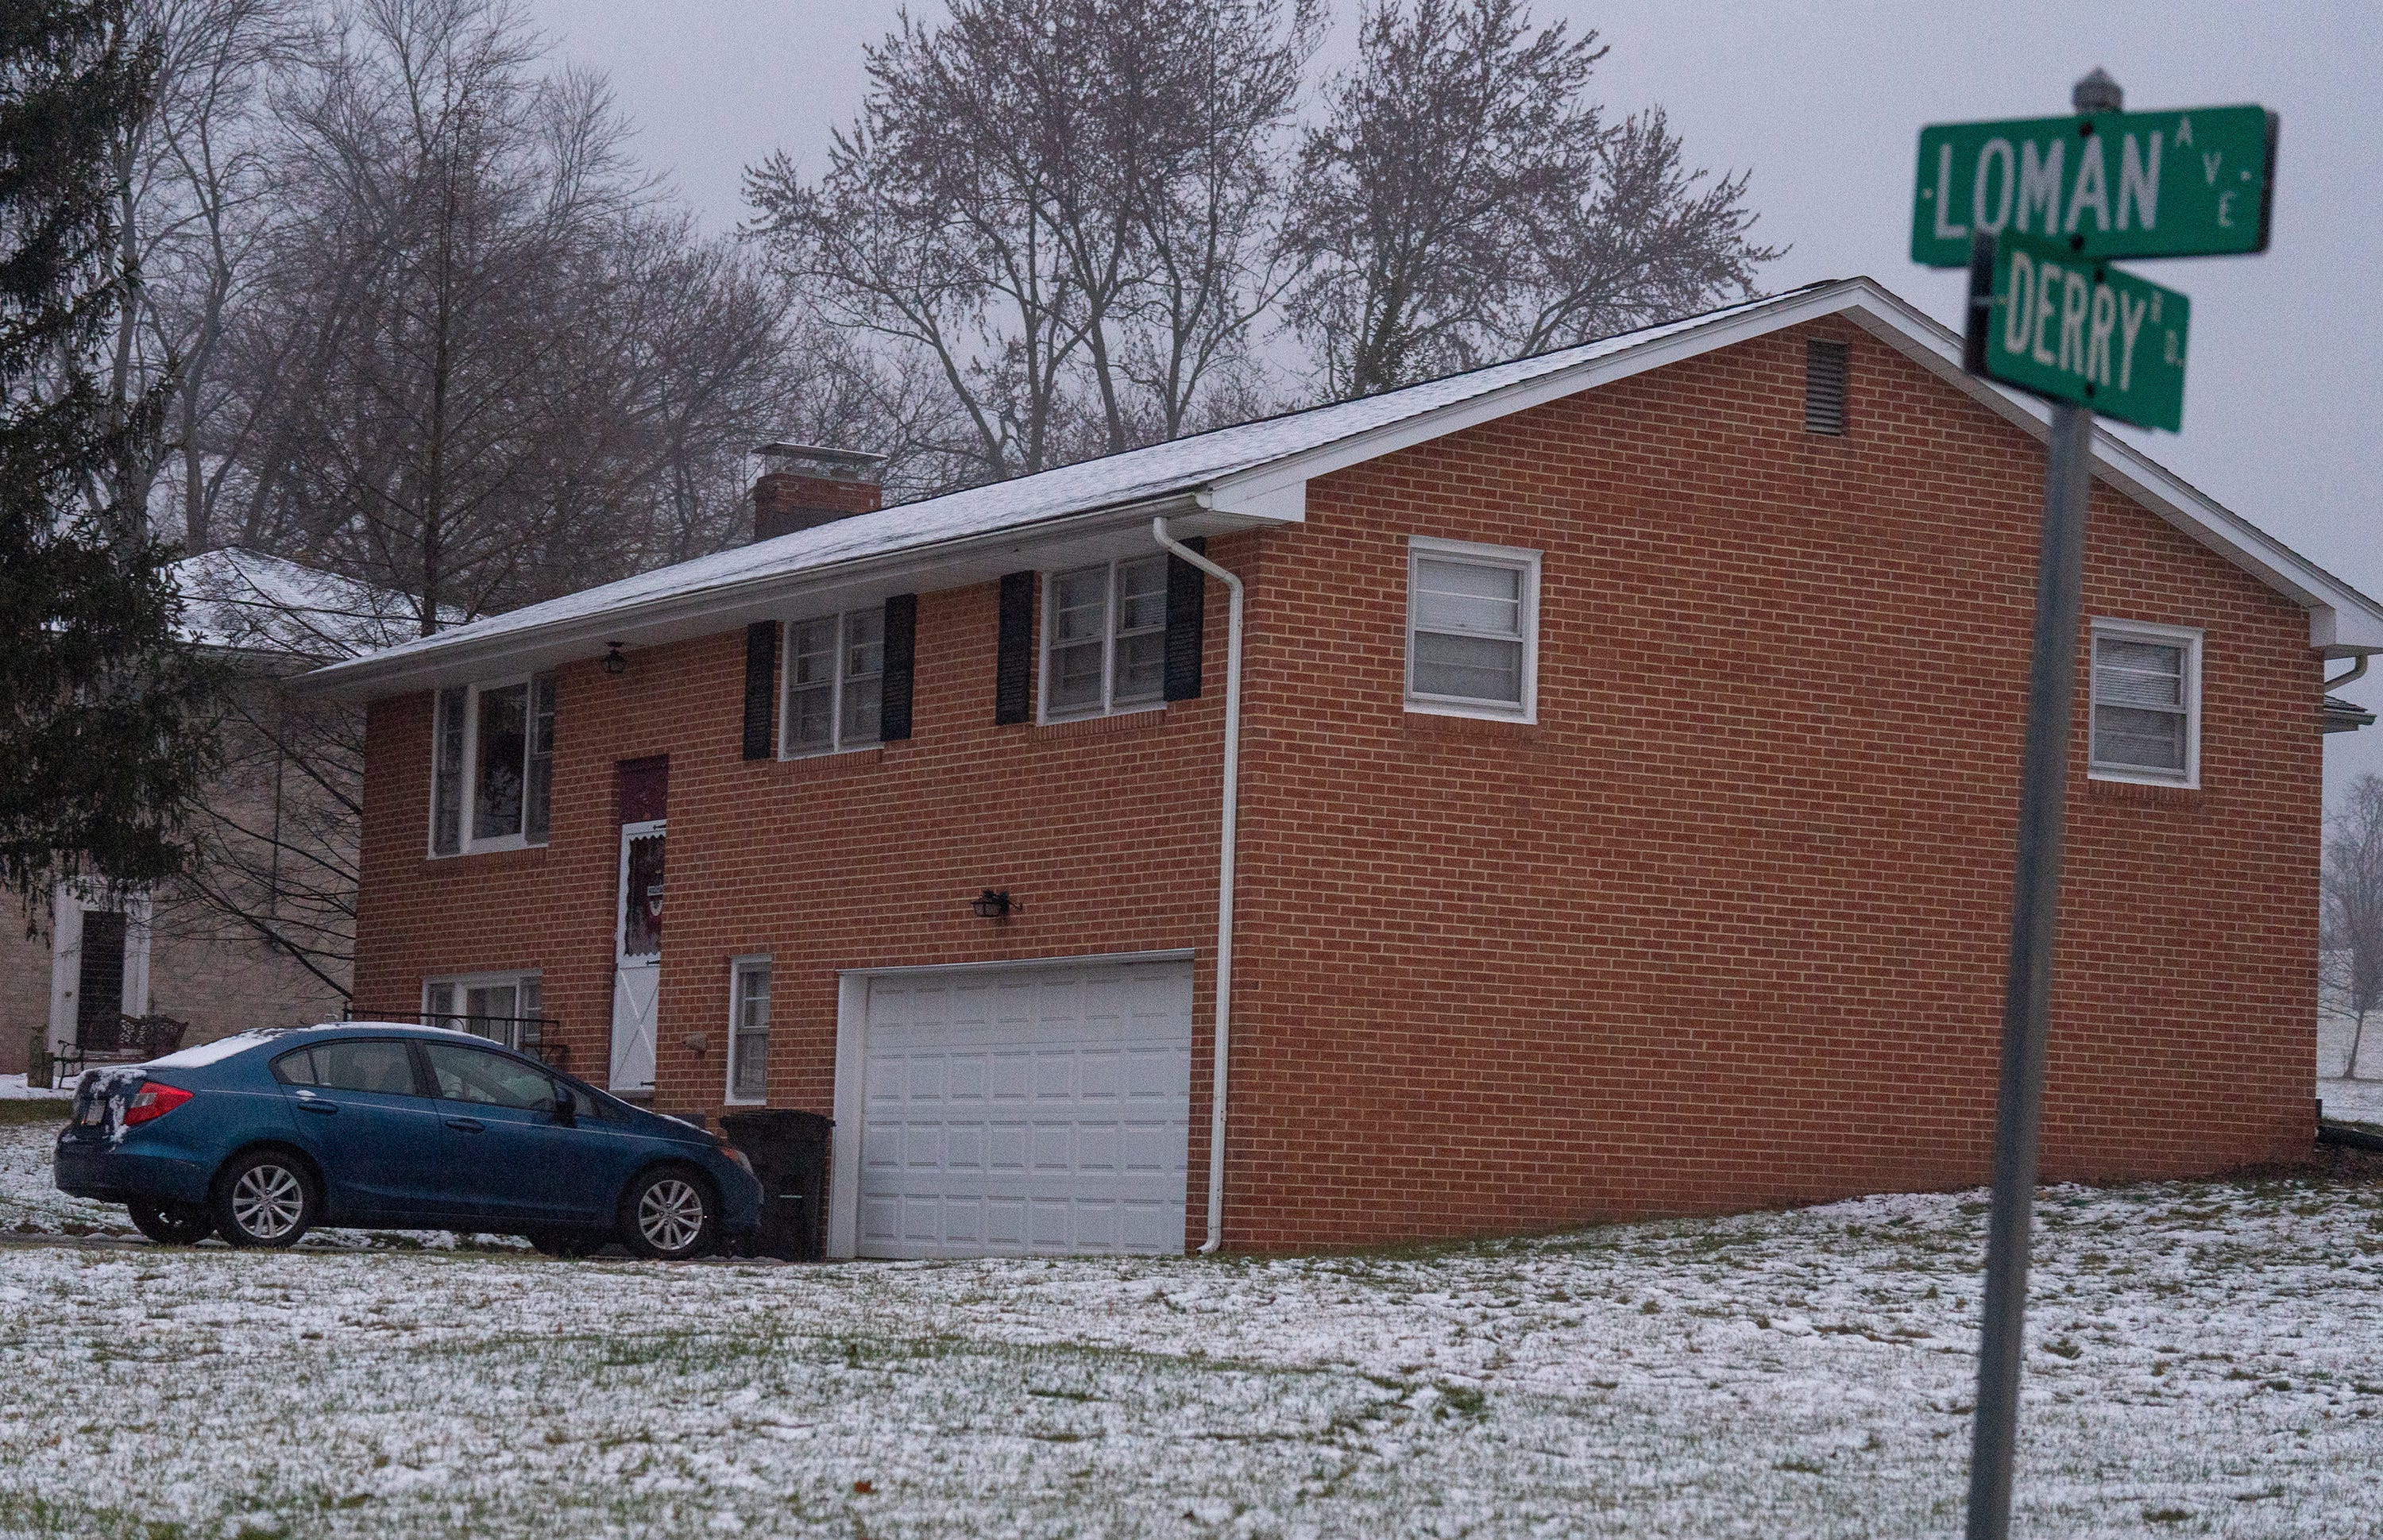 The site of an incident at 2098 Loman Ave. in  West Manchester Twp. on Wednesday, Jan. 25, 2023.